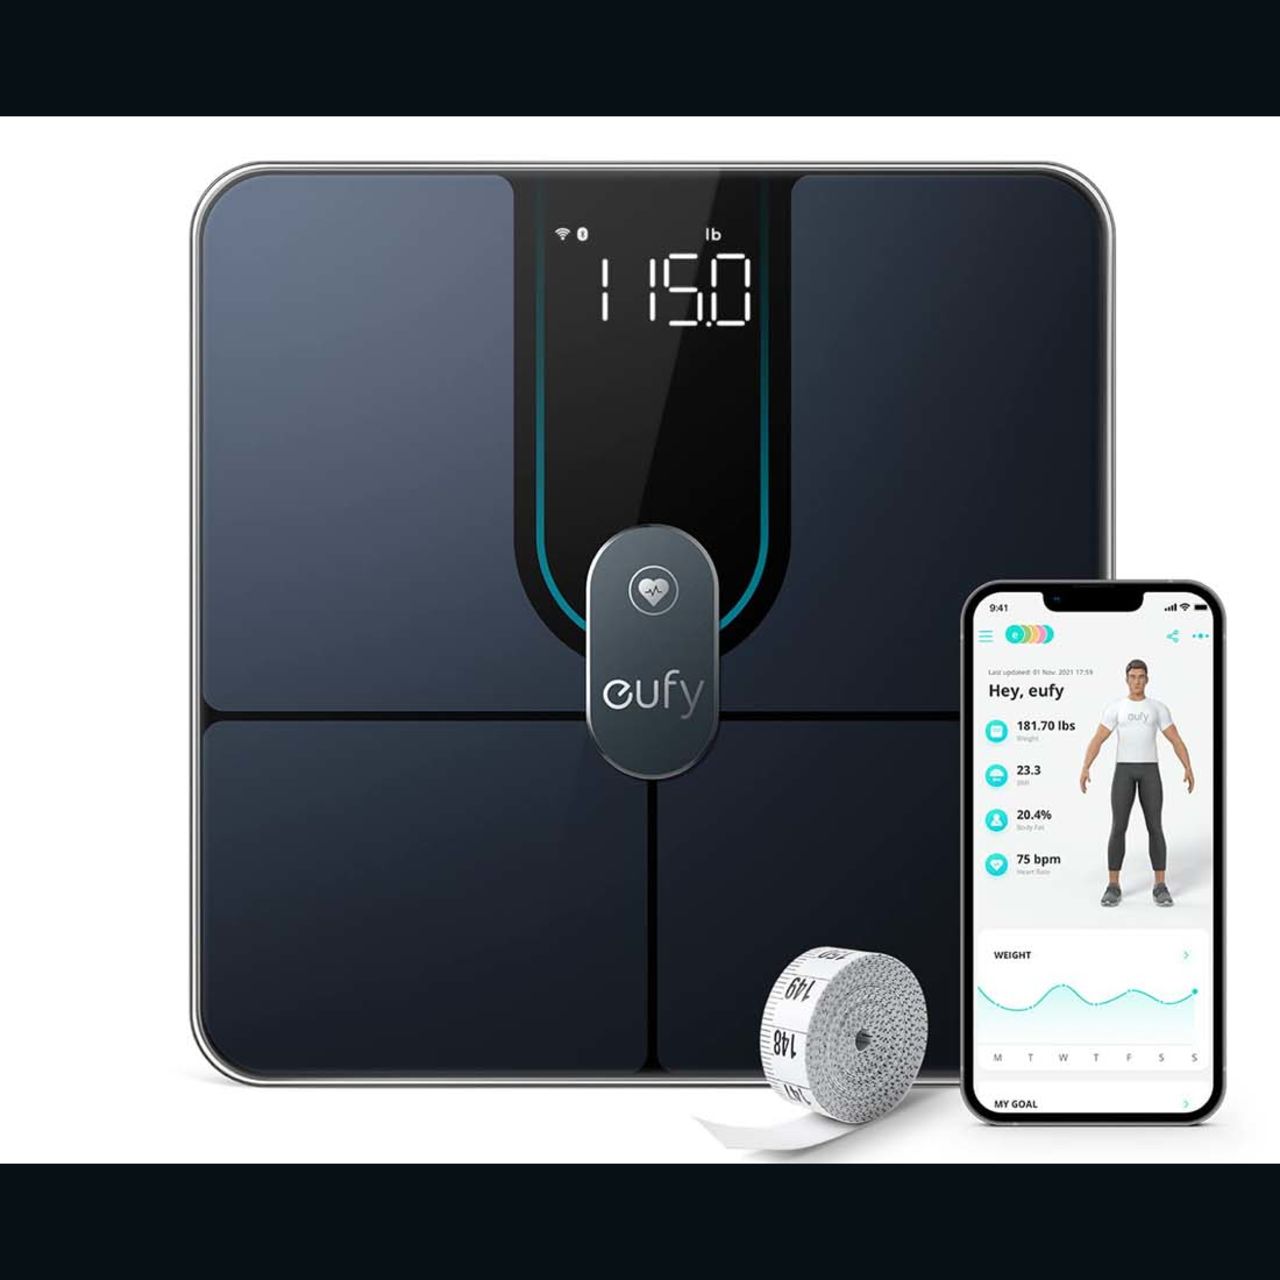 Smart scale can analyze your food's nutrition